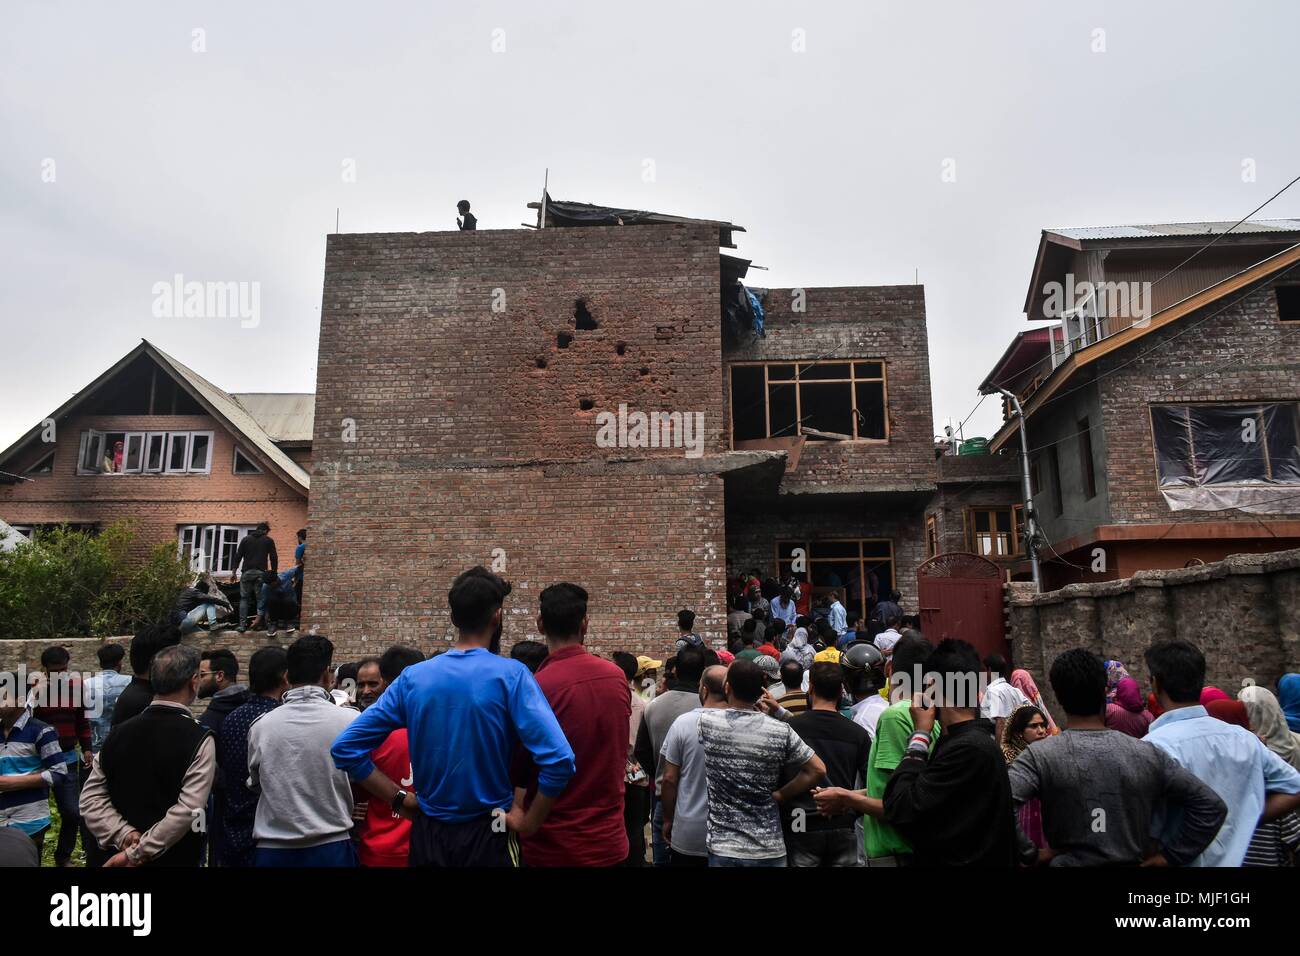 Kashmir, India, 5 May 2018.  Kashmiri residents assemble near the damaged hous militants were trapped during an encounter in Srinagar, Indian administered Kashmir. Three suspected militants and one civilian have been killed while three Indian paramilitary men sustained injuries in a gun battle in Srinagar, the summer capital of Indian administered Kashmir. The encounter started after government forces cordoned off a Chattabal area following the presence of militants in the area, officials said.  the militants were believed Credit: ZUMA Press, Inc./Alamy Live News Stock Photo